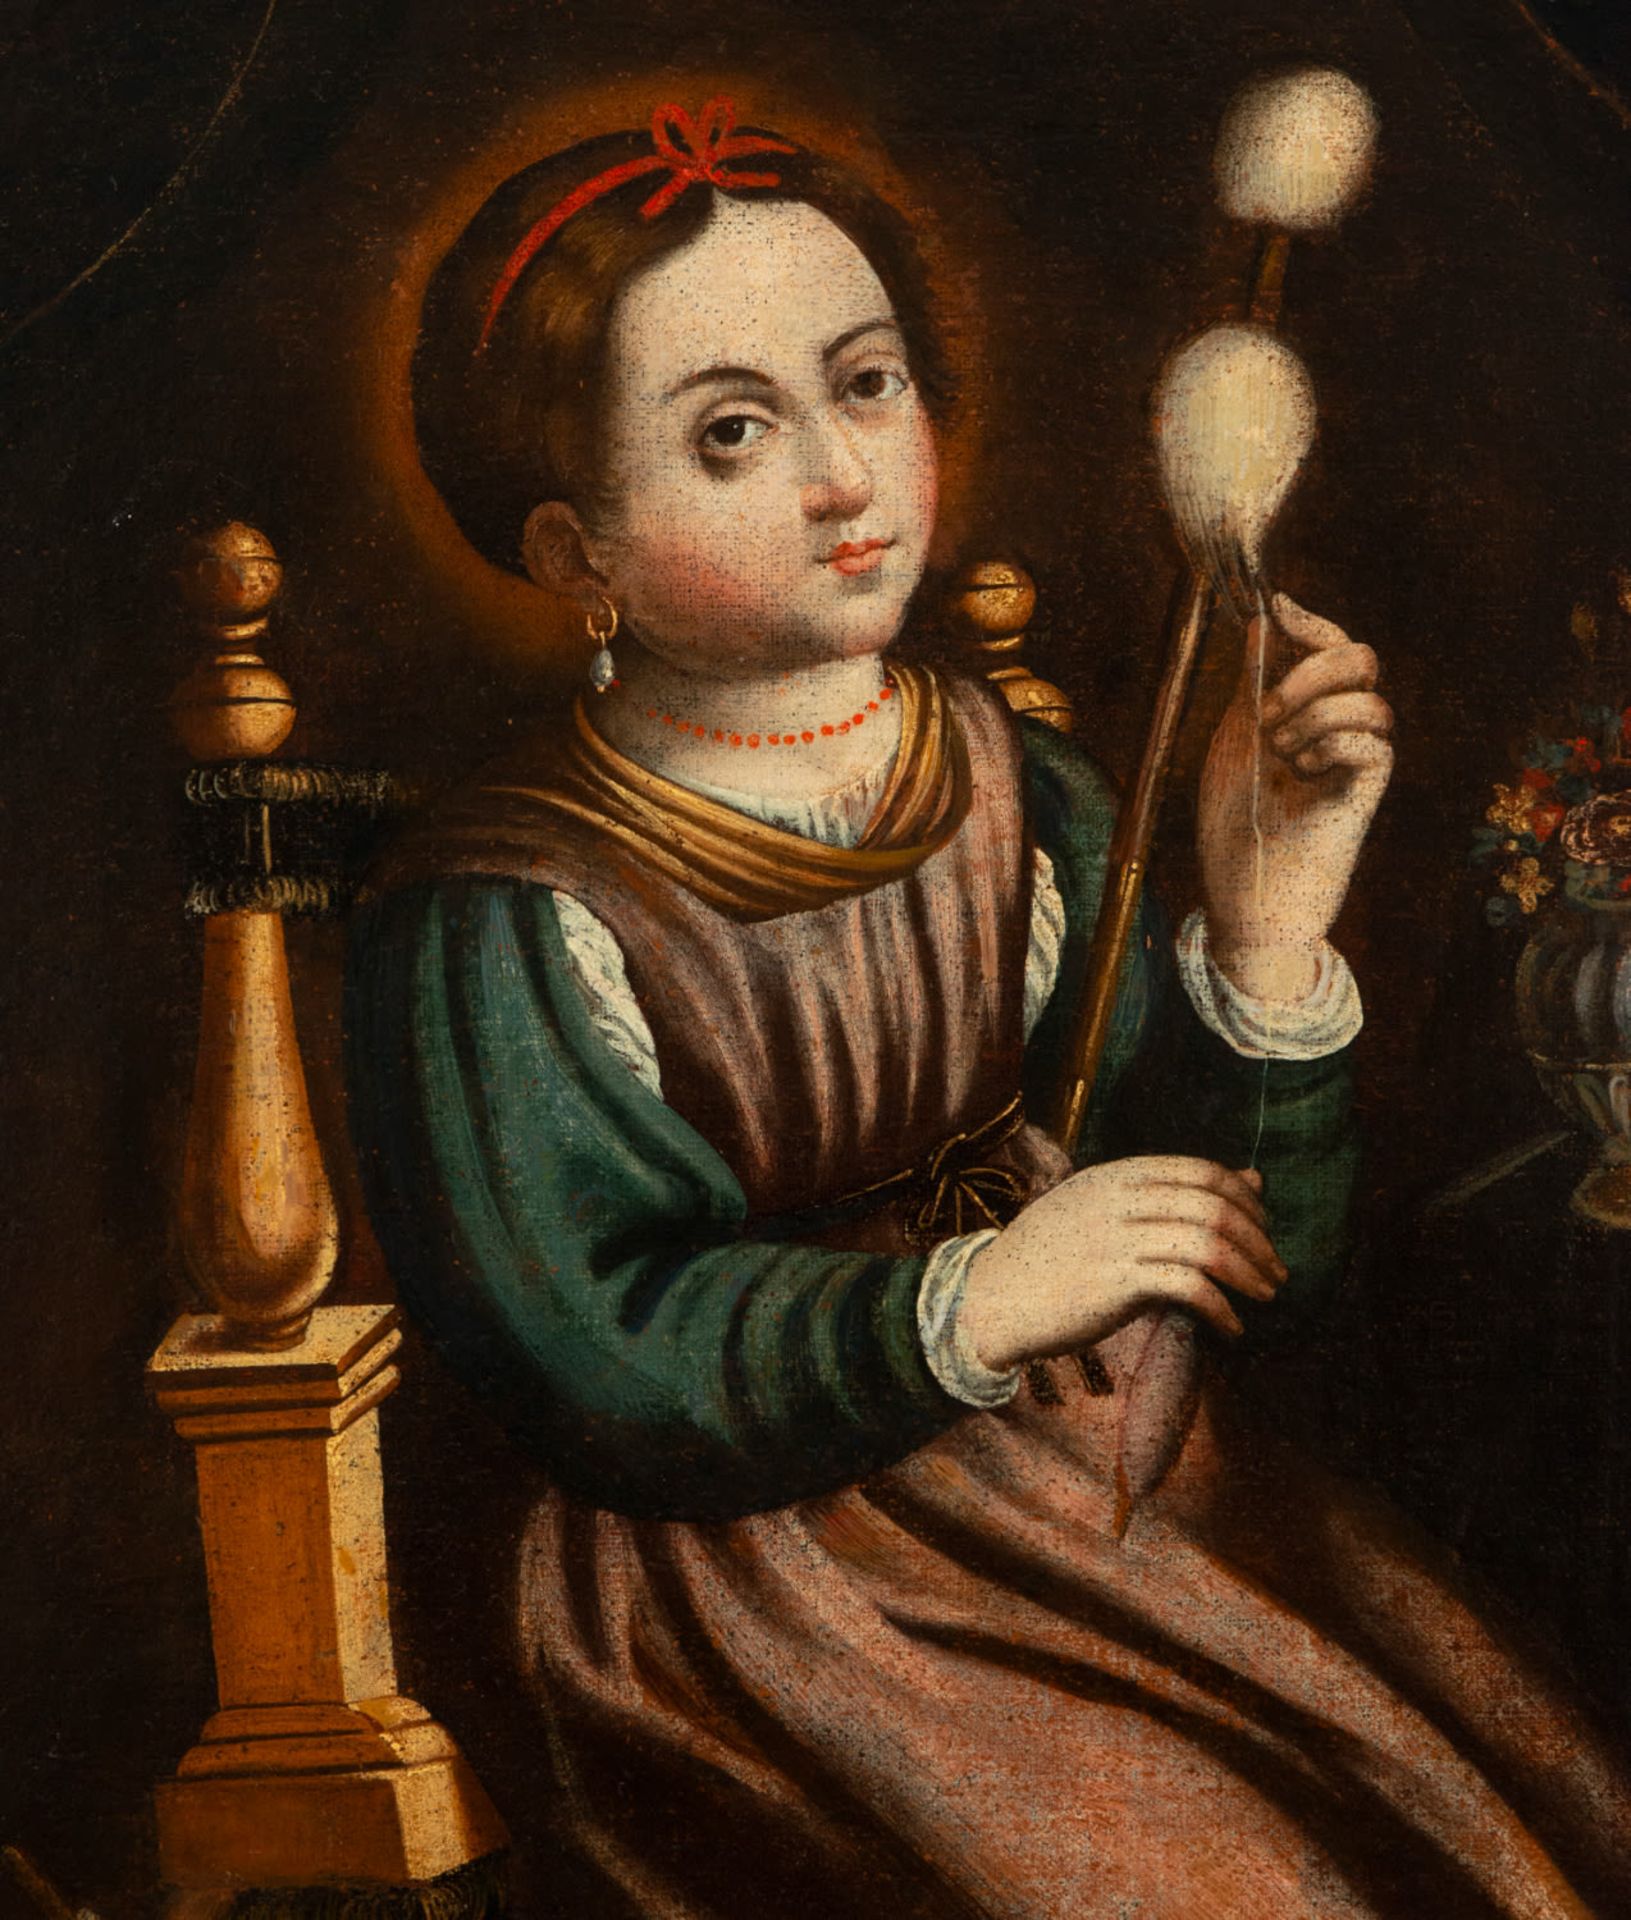 Virgin Mary as a child, spinning, Spanish school, 17th - 18th centuries - Image 2 of 3